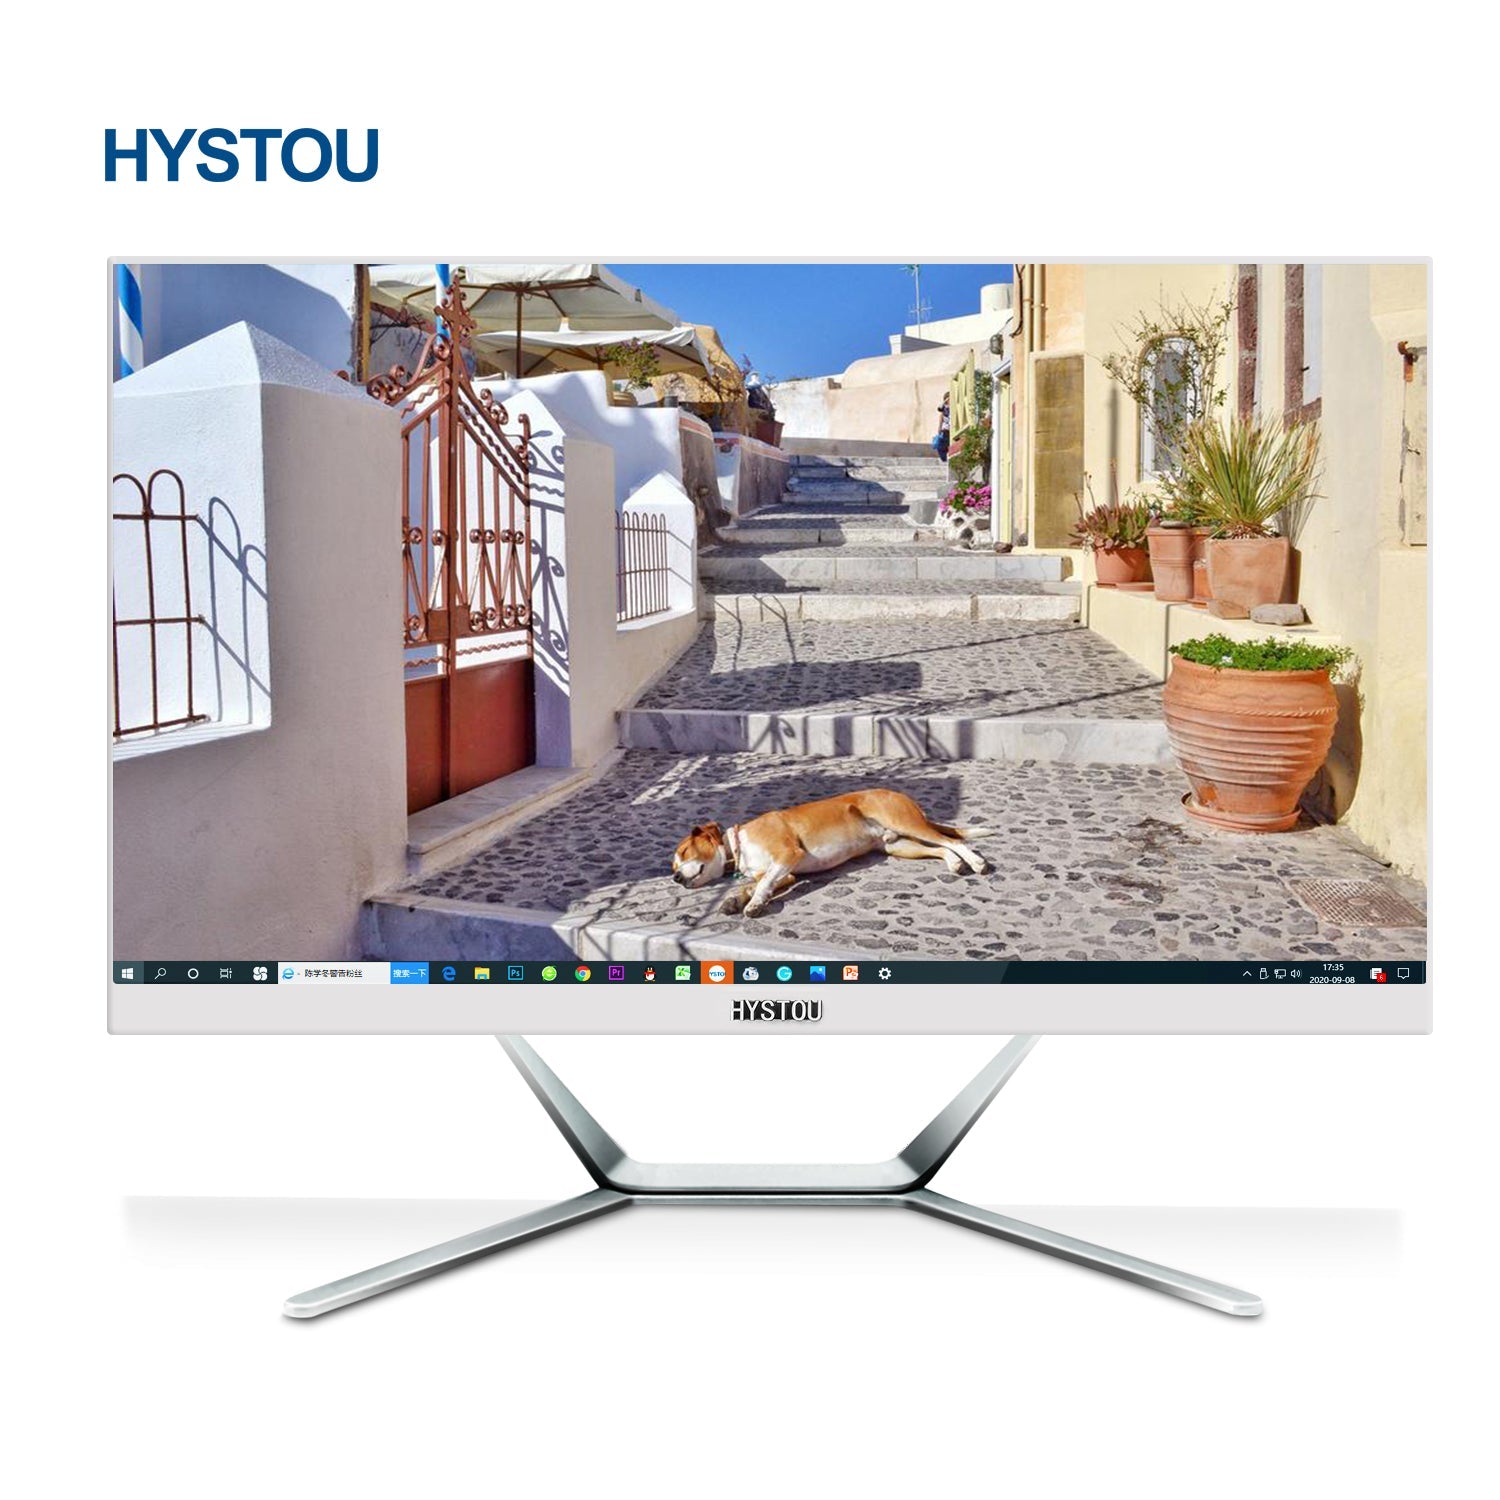 Hystou 23.8 Inch PC Gaming Core I7 8569U DDR4 LCD Monitor All In One Desktop Computer | Electrr Inc